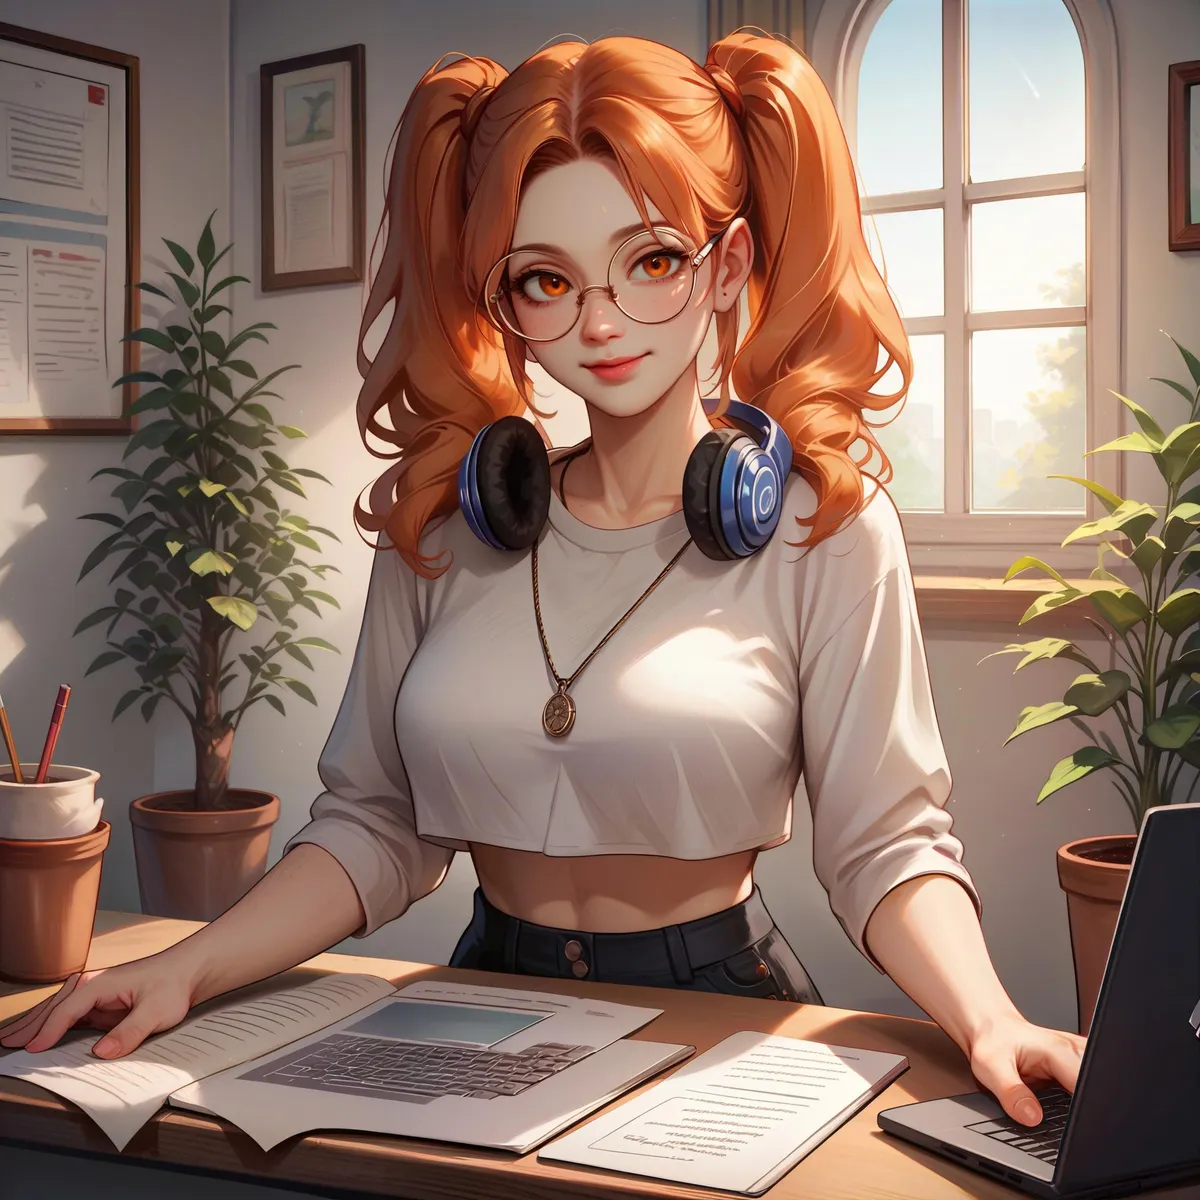 Redheaded girl in anime style with glasses and headphones, working at a desk with documents and a laptop, AI generated image using Stable Diffusion.